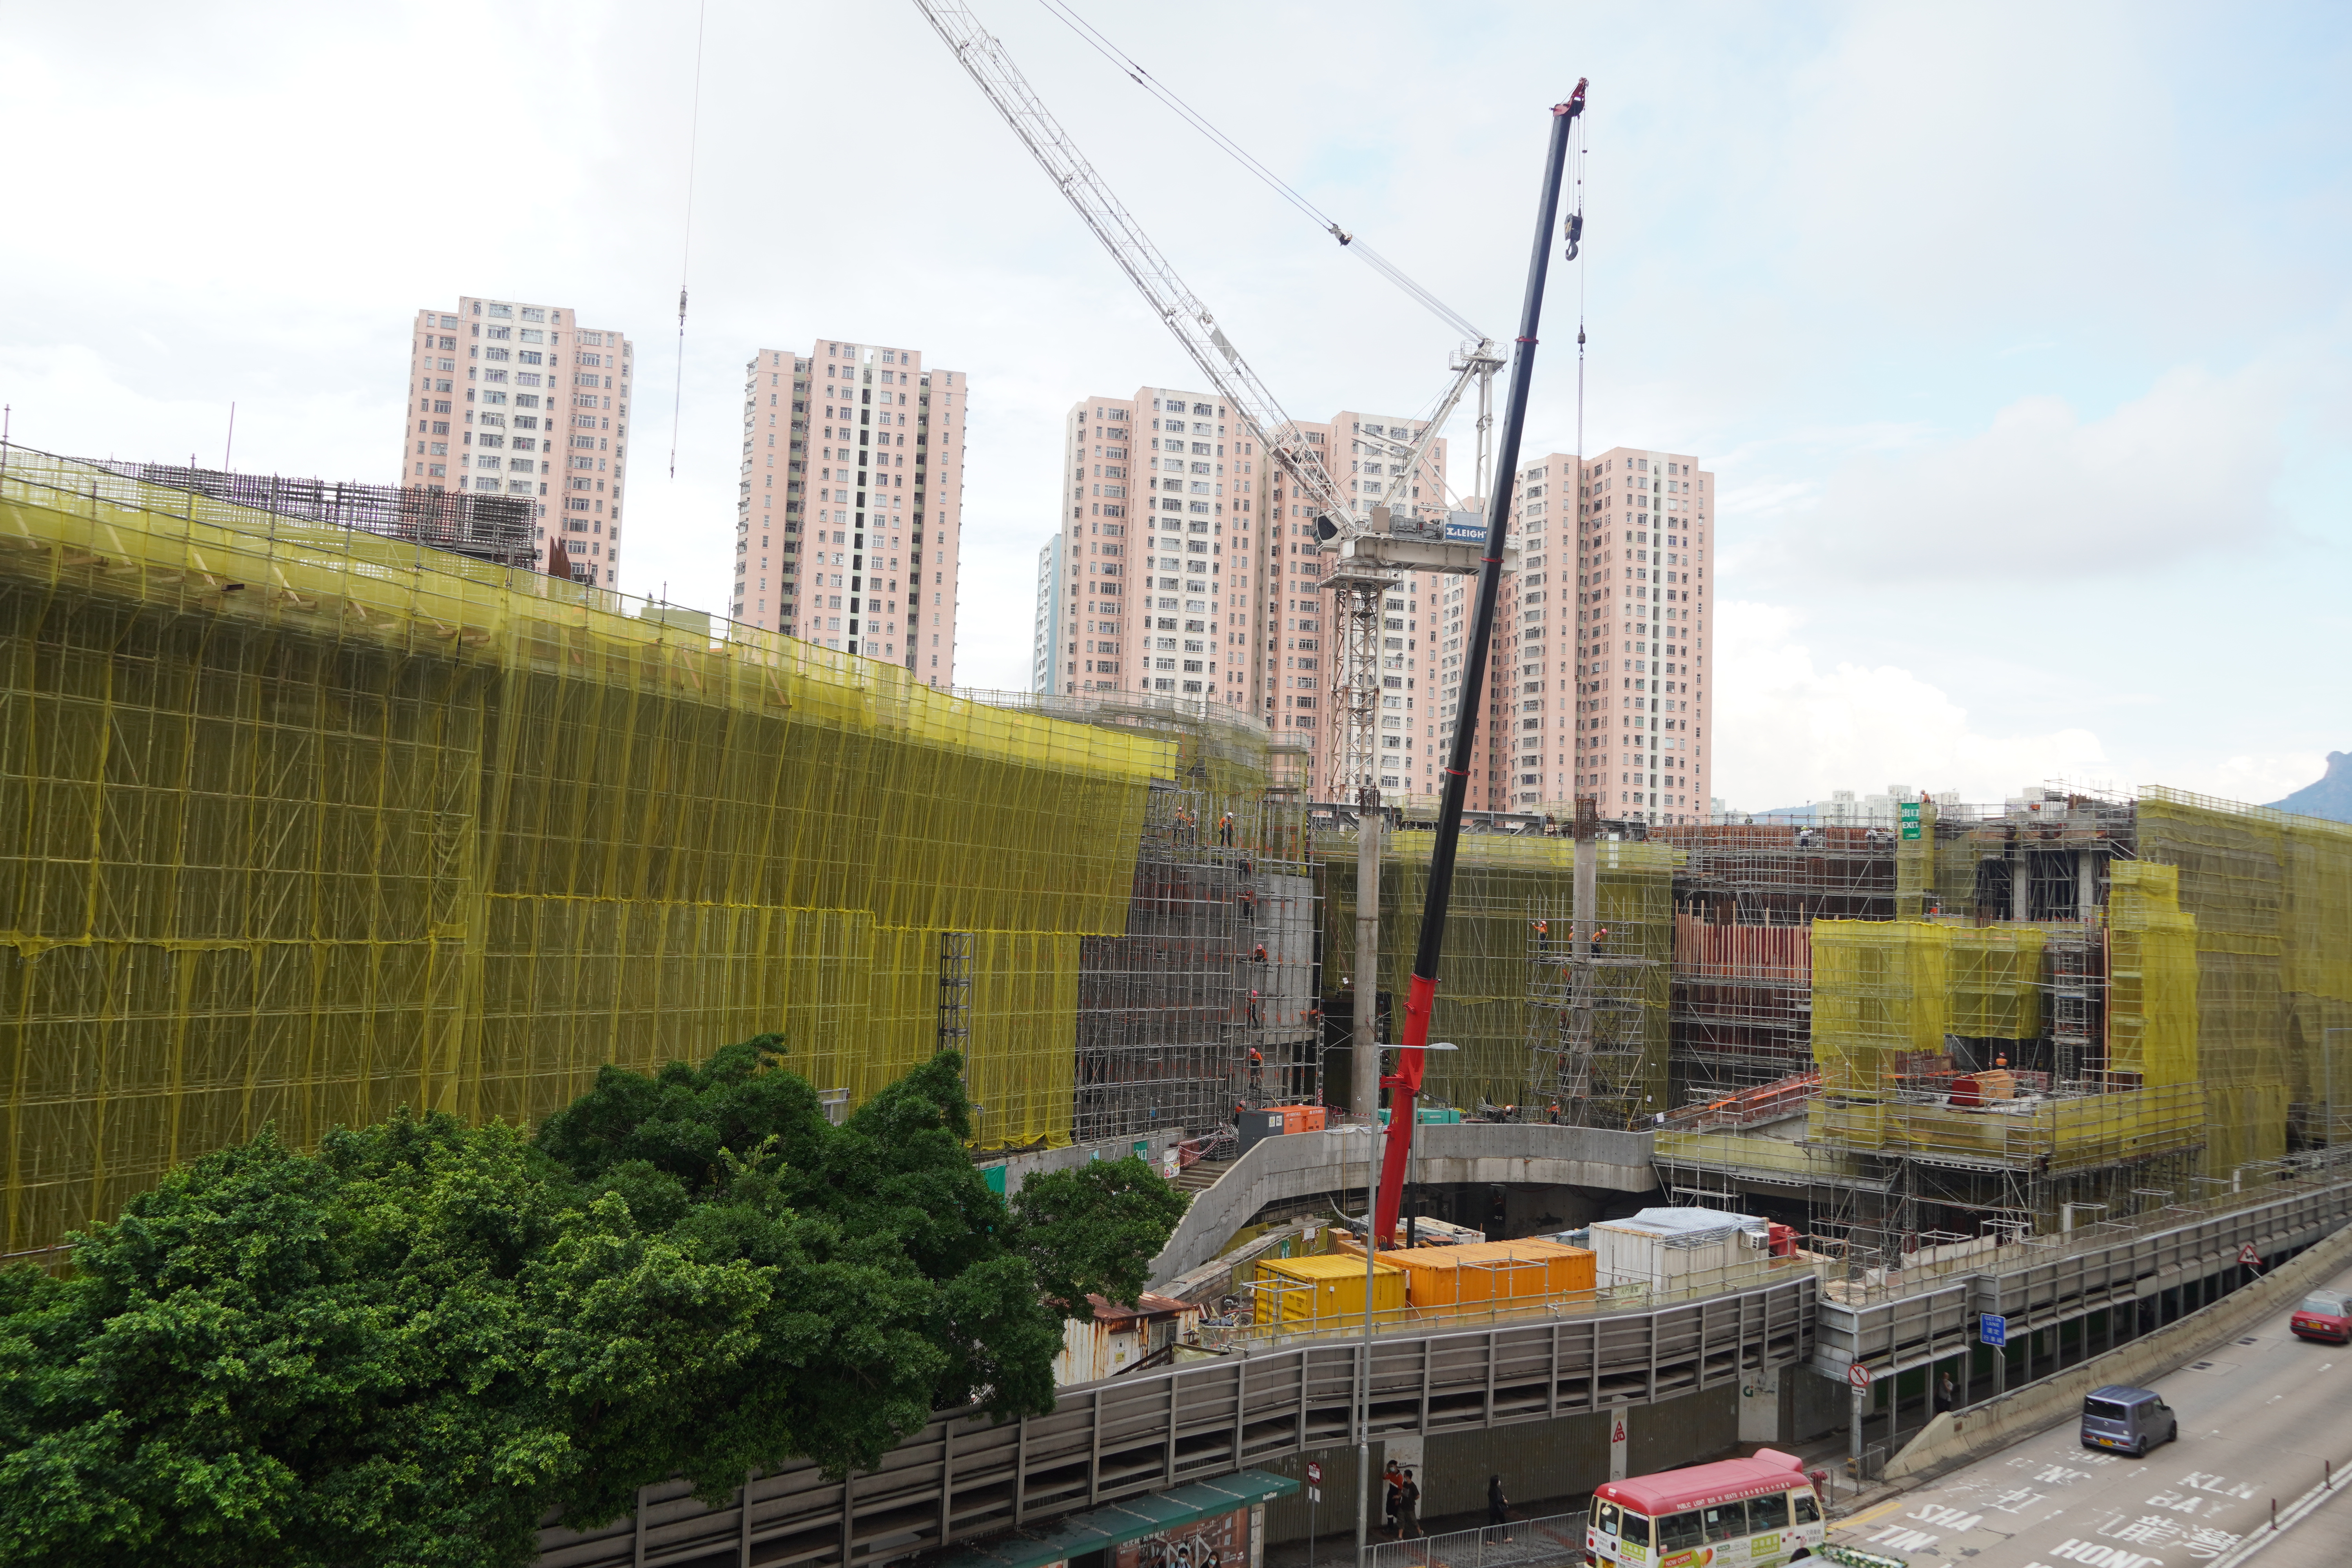 Construction of the East Kowloon Cultural Centre in Kowloon bay